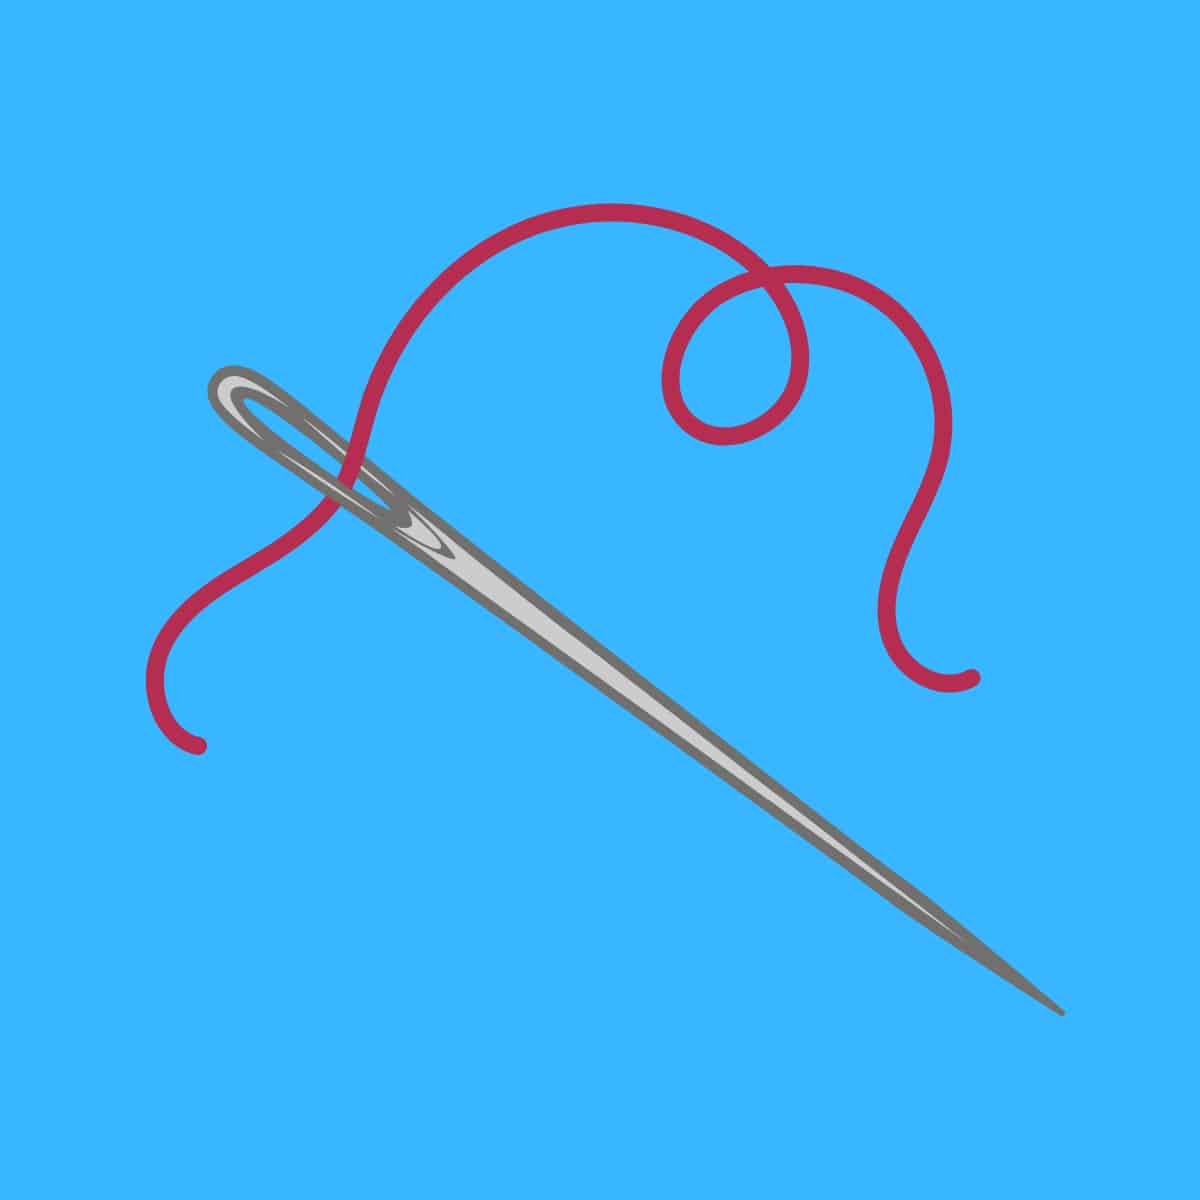 Cartoon graphic of a needle and red thread on a blue background.